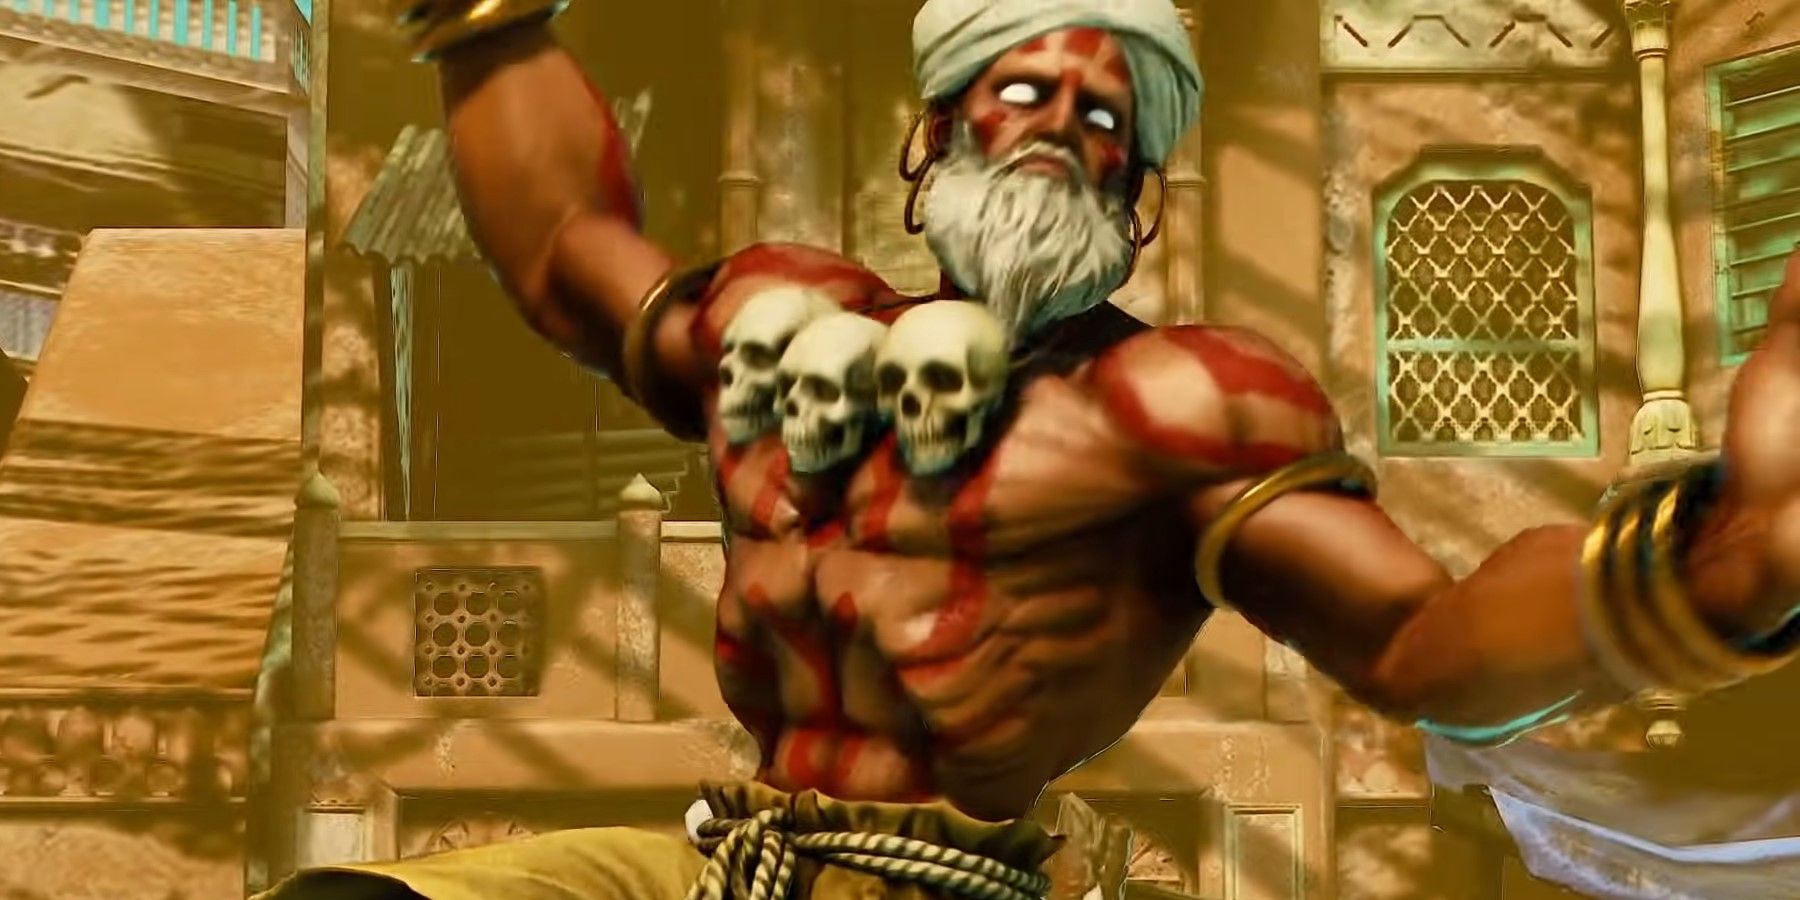 Dhalsim spreading out his arms